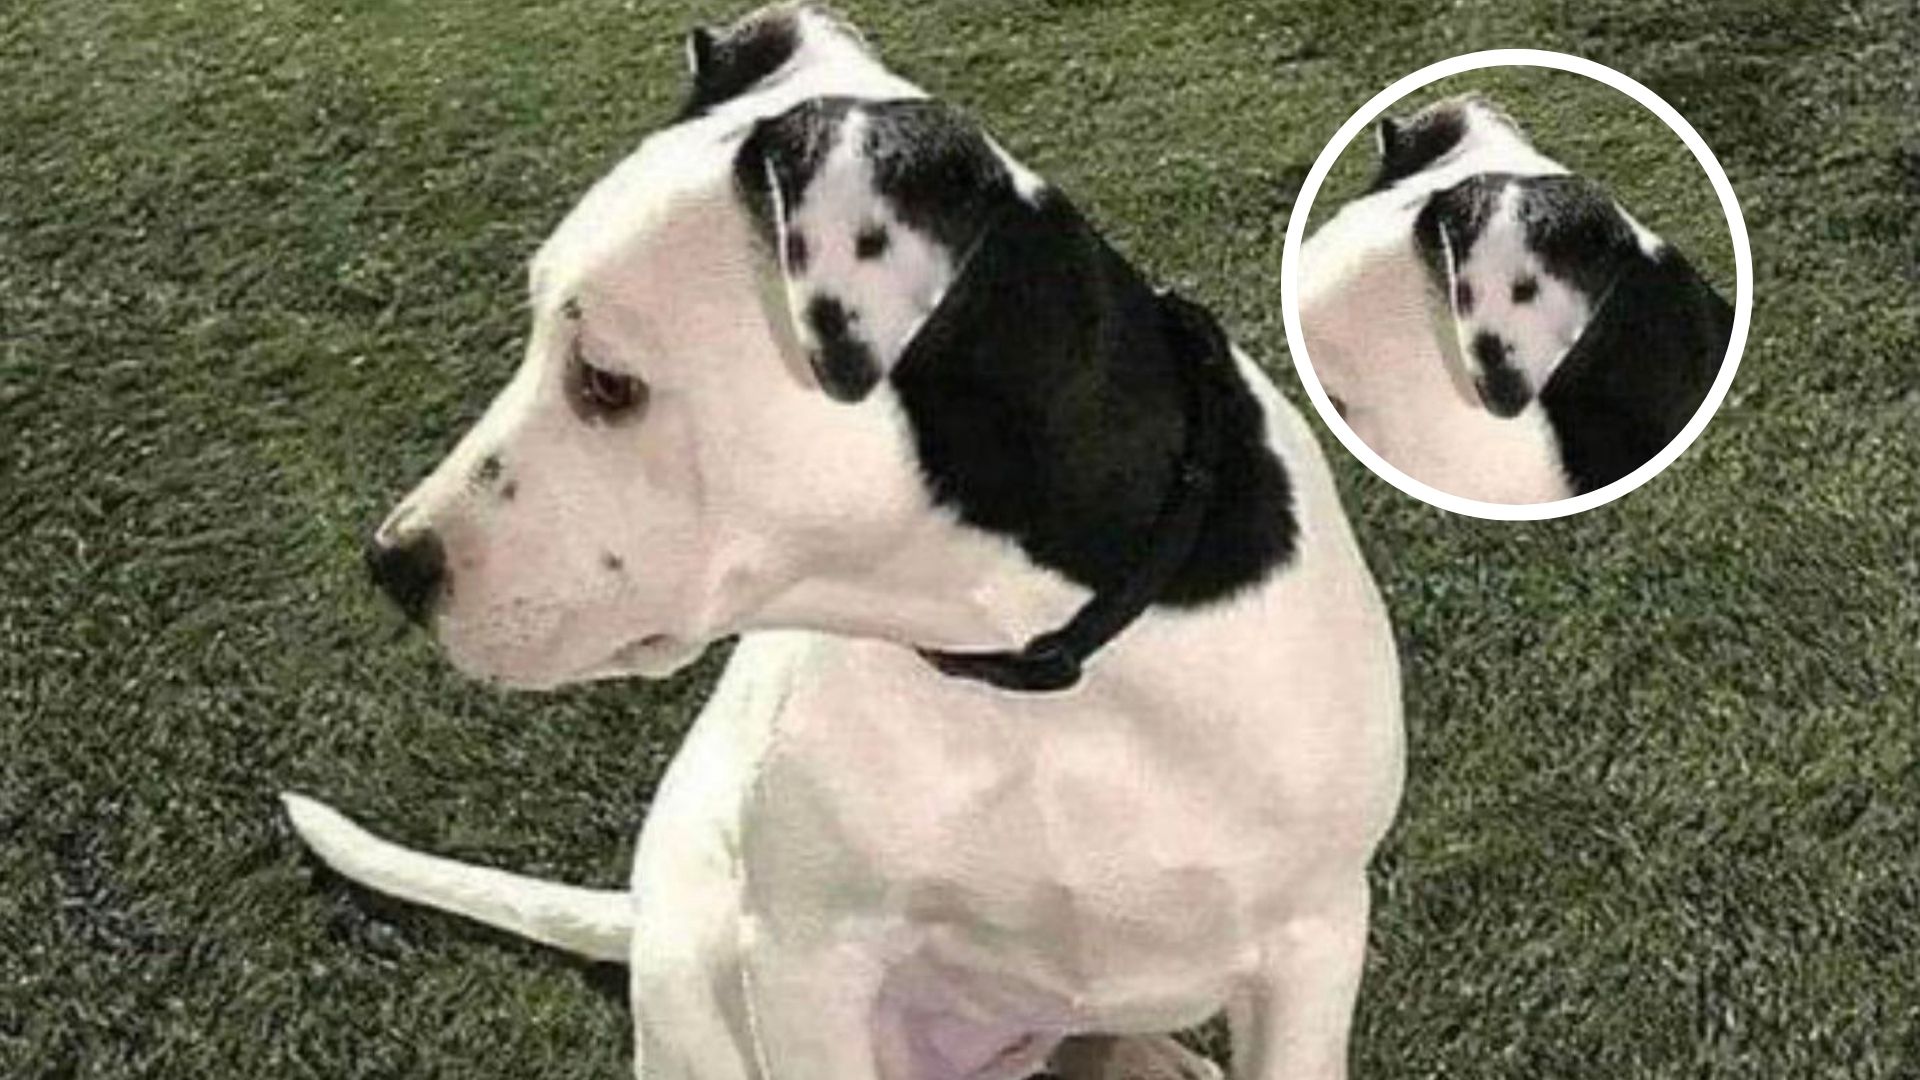 This Sweet Dog Has A Funny Picture Of Herself On Her Left Ear